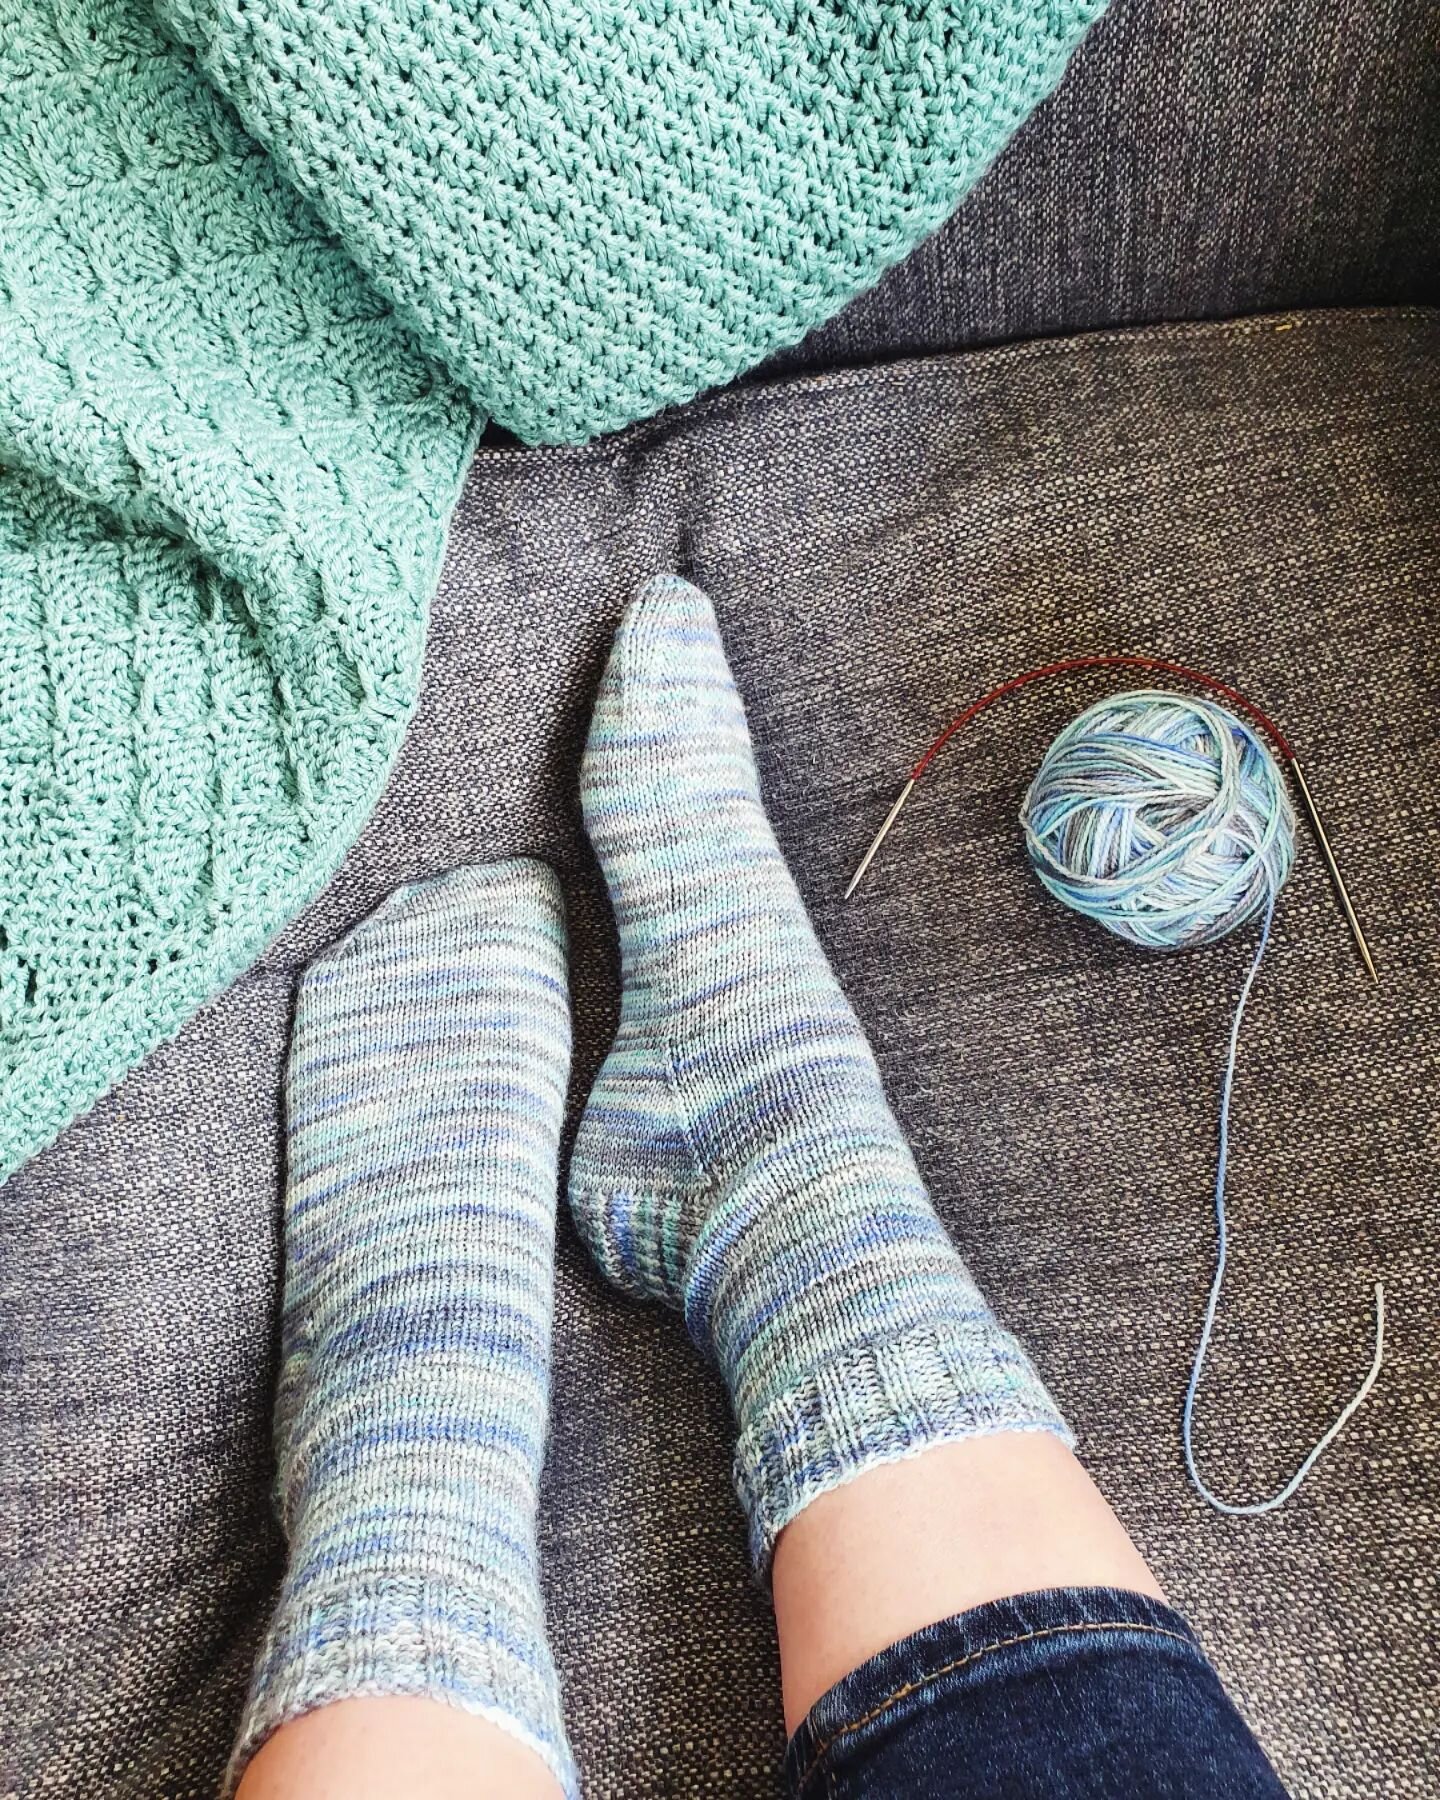 I'm so proud of my second pair of socks that I thought they deserved a post of their own! 😍 I'm not a fast knitter so these were knitted in fits and starts over the last few months using @winwickmum Sockalong pattern. Not sure who I got the yarn fro